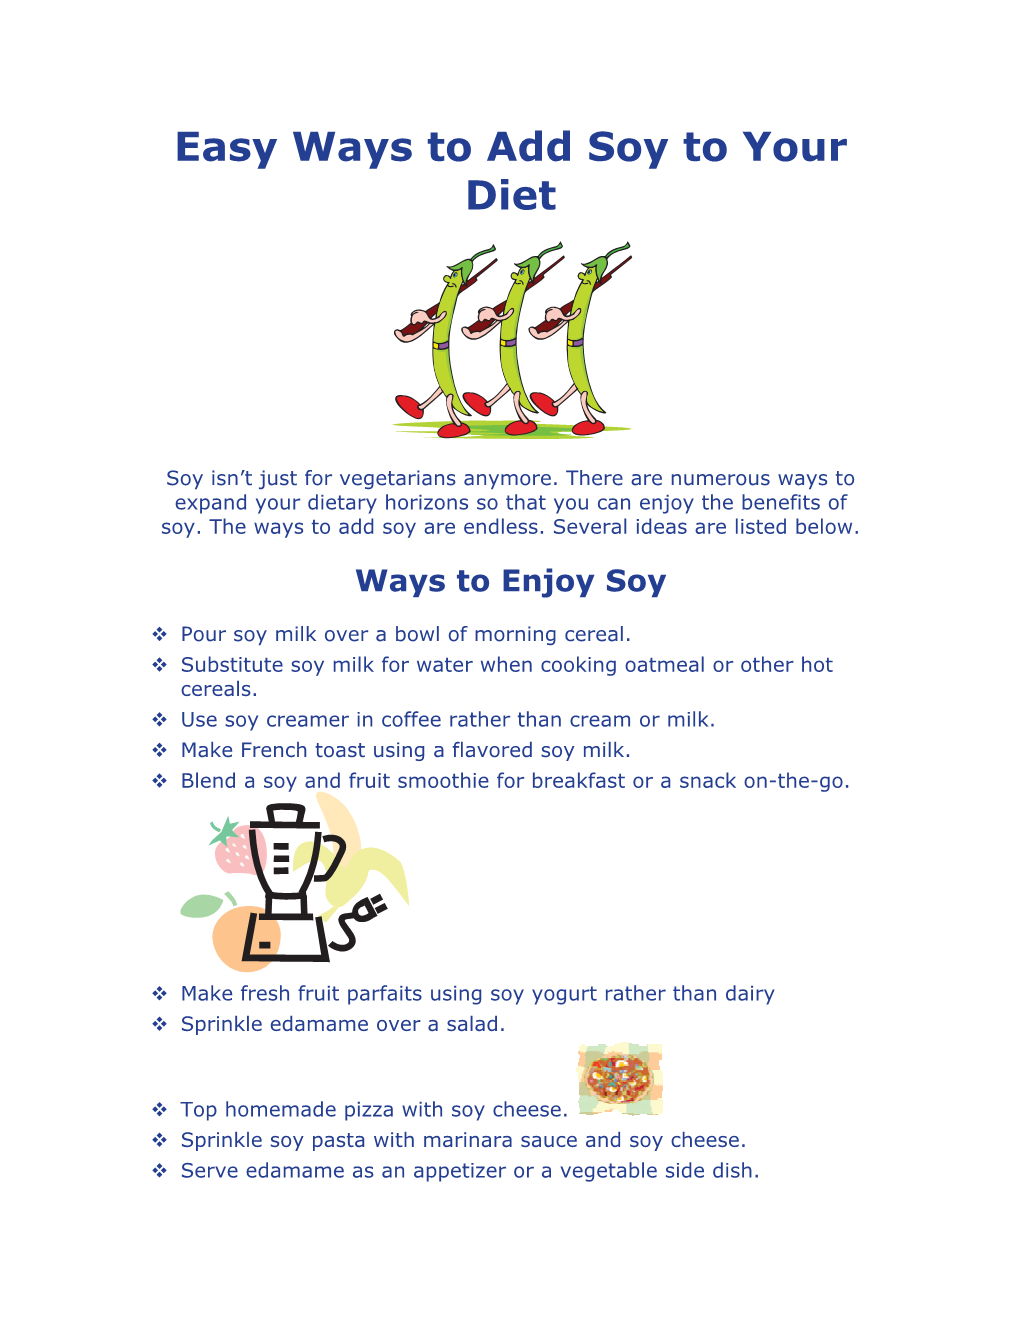 Easy Ways to Add Soy to Your Diet